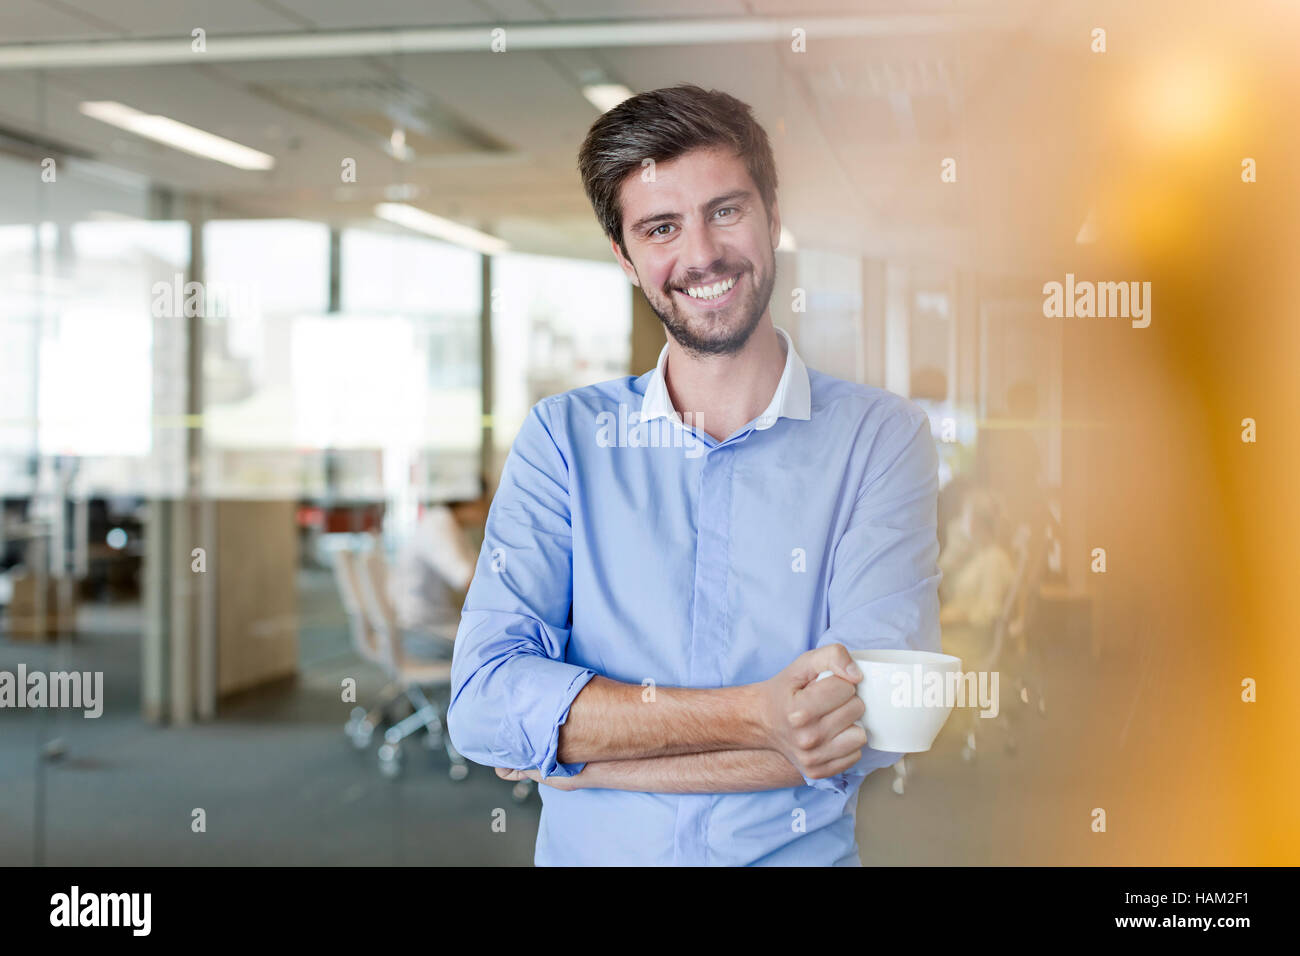 Portrait confident businessman drinking coffee in office Banque D'Images